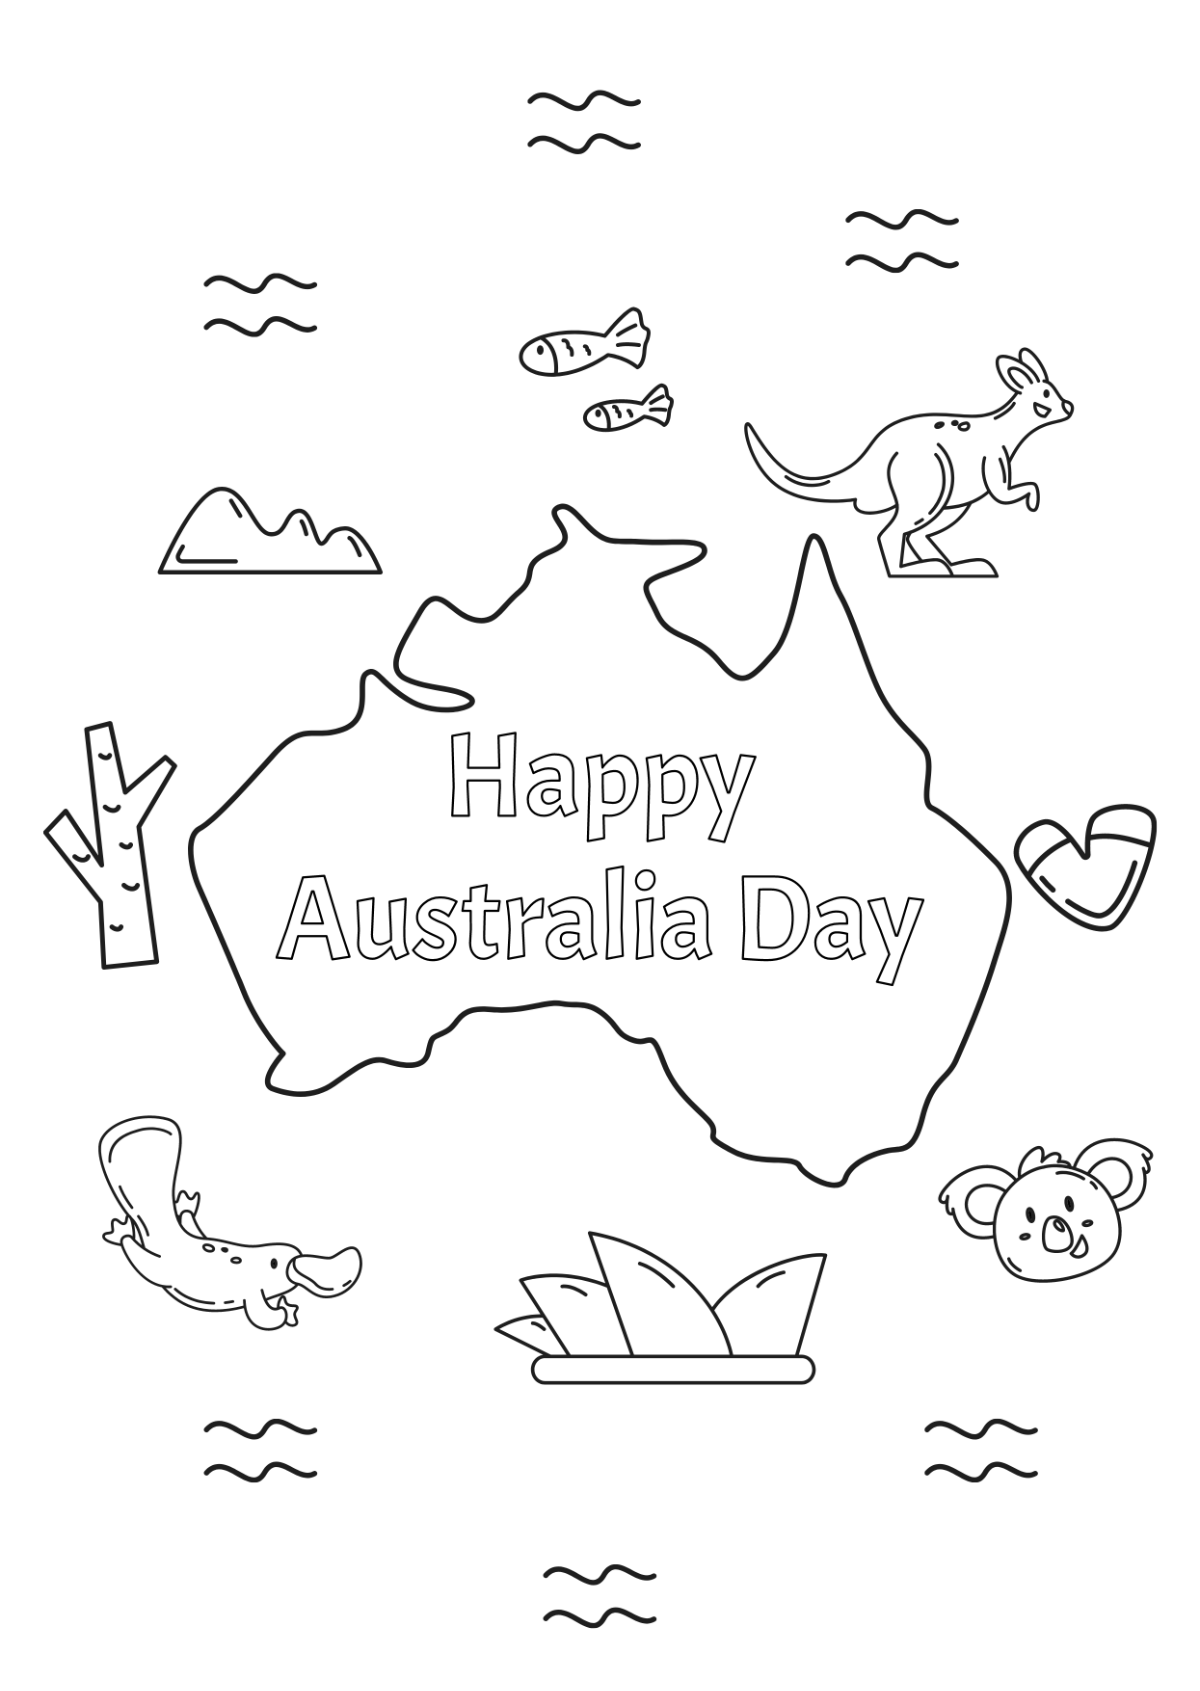 Australia Day Drawing for Kids